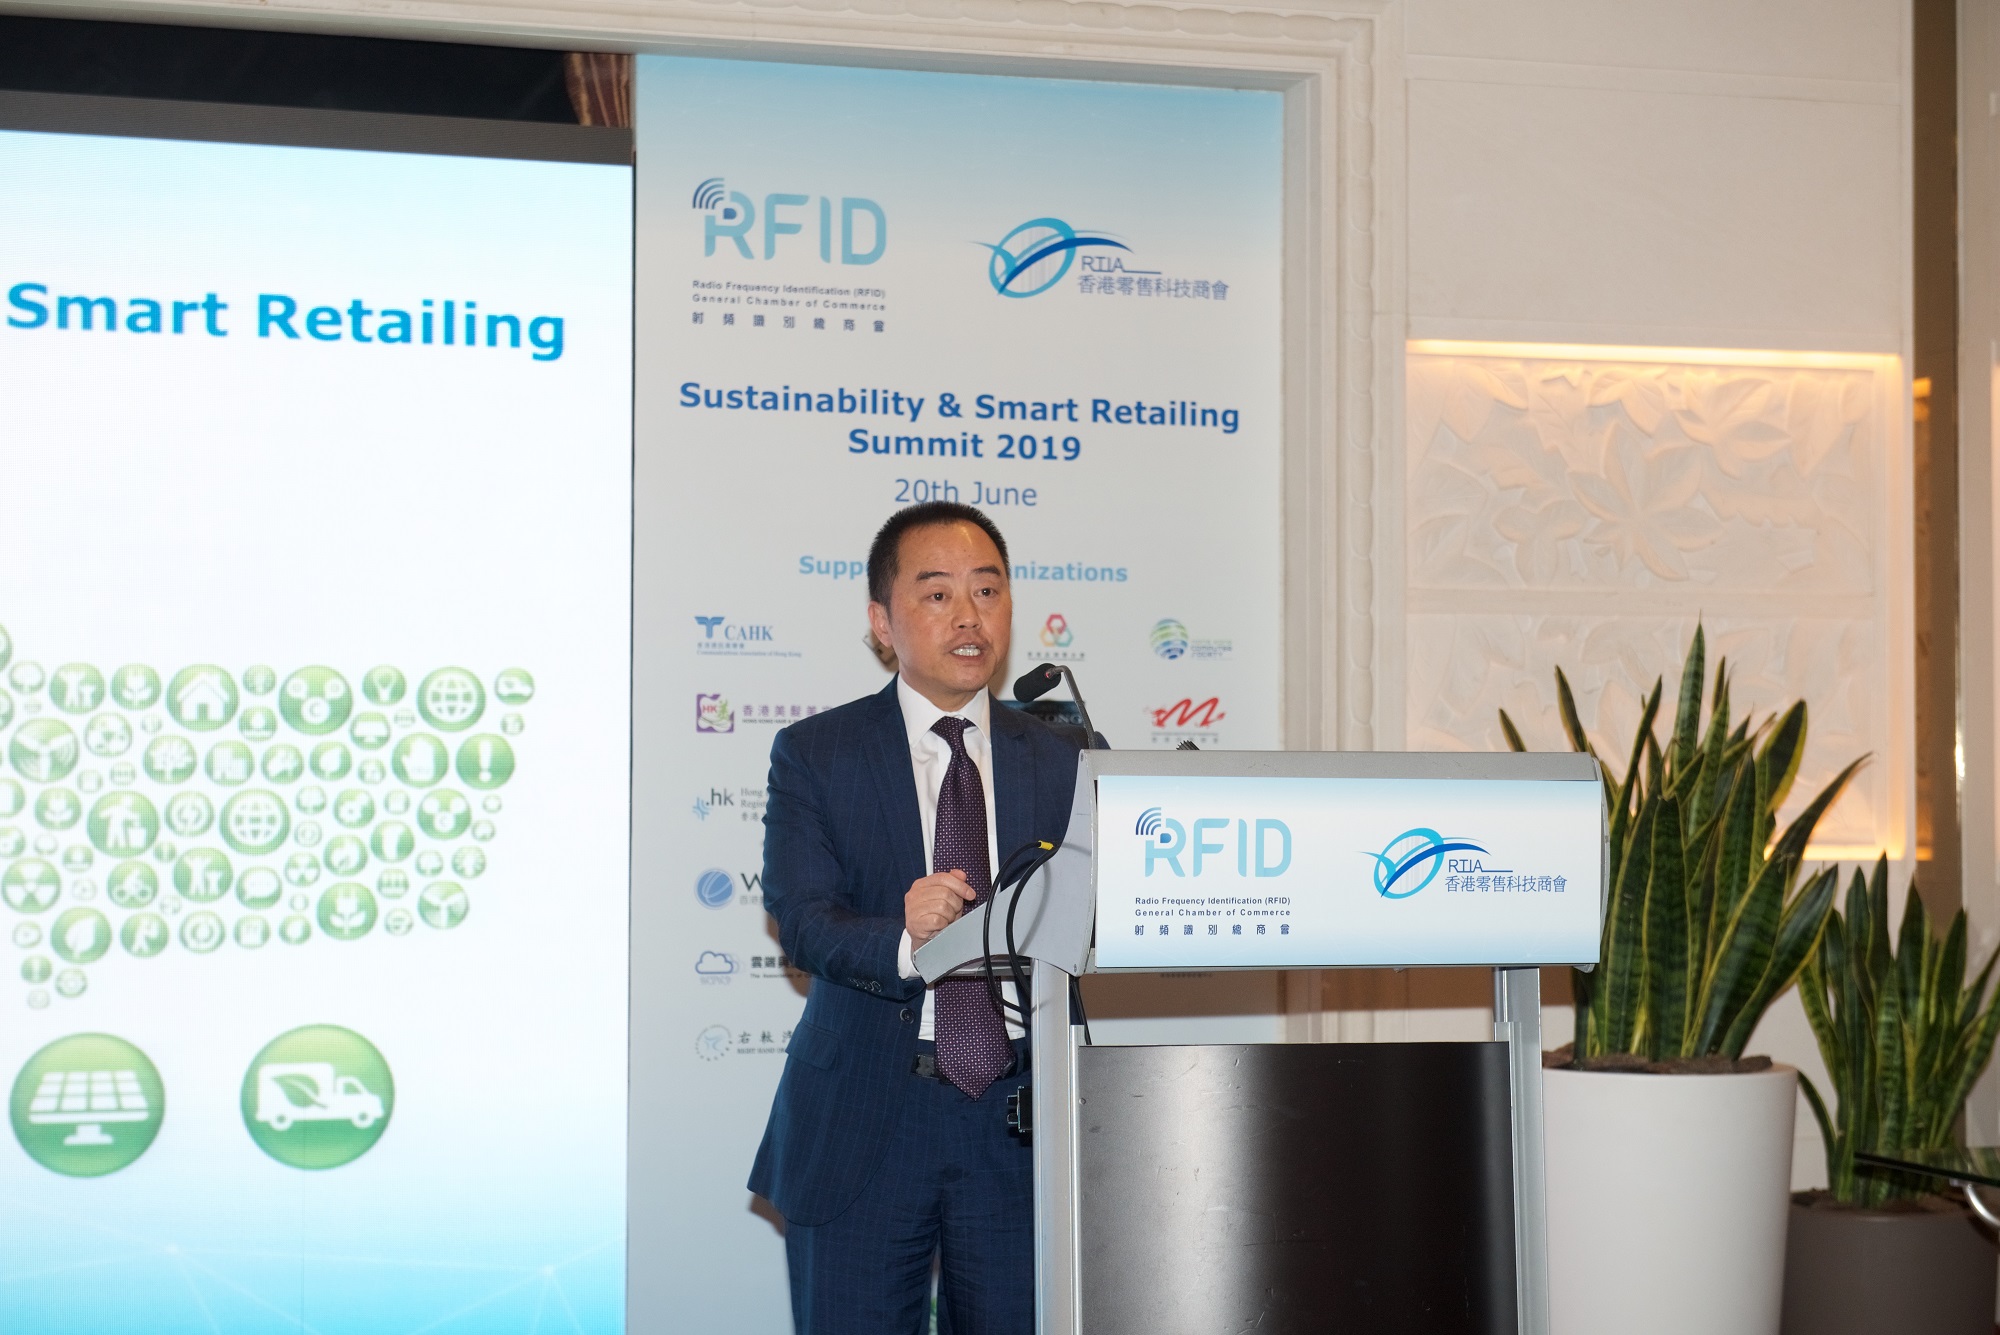 Mr. Tony Wong, Assistant Government Chief Information Officer (Industry Development), delivers Opening Speech at the "Sustainability & Smart Retailing Summit 2019".